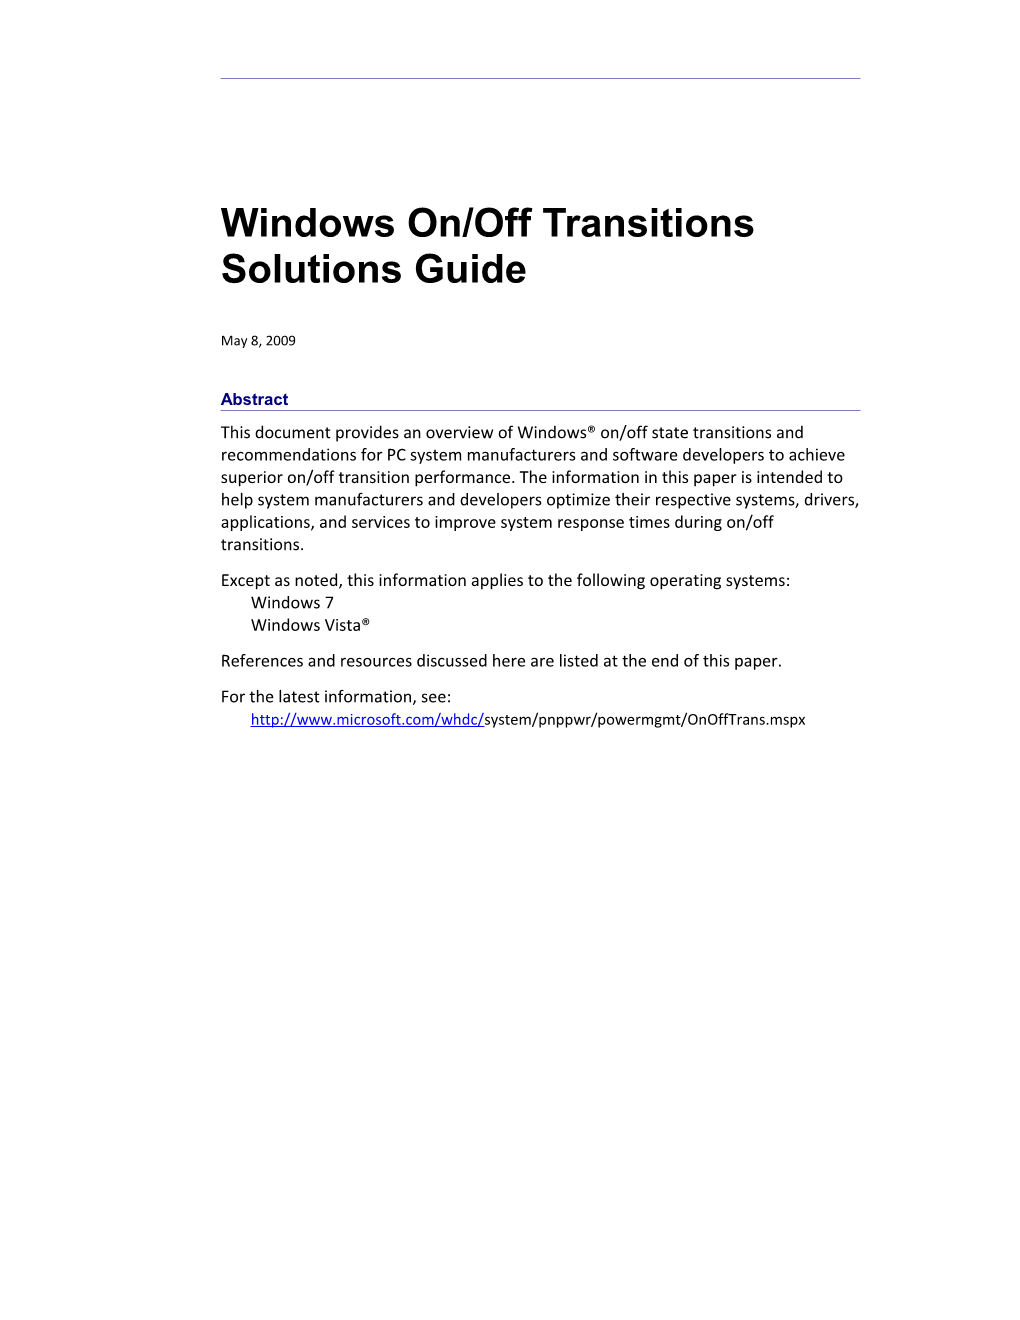 Windows On/Off Transitions Solutions Guide - 1